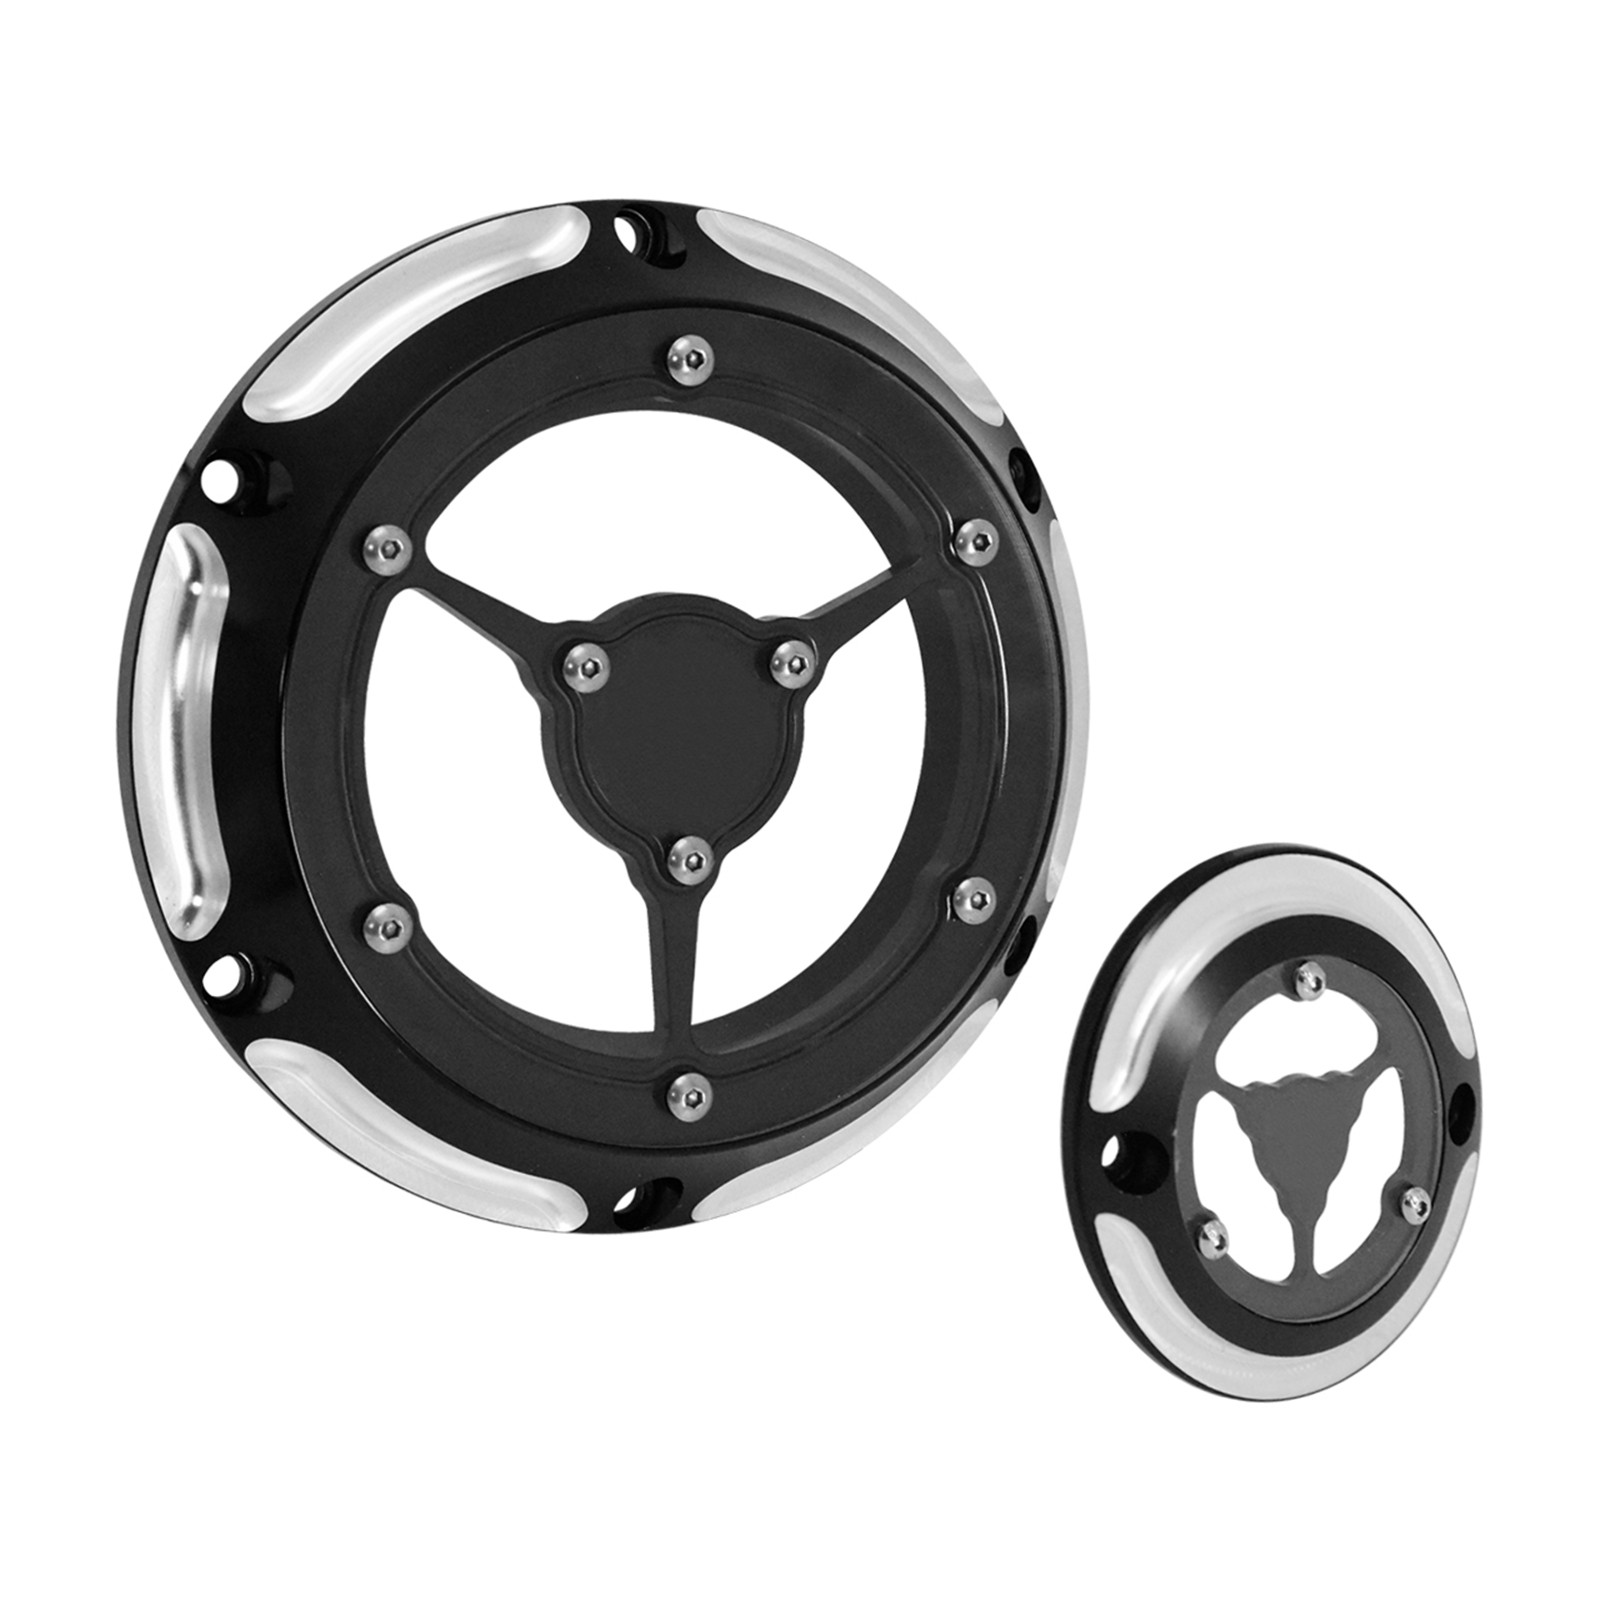 6 Holes Derby Cover Timing Timer Covers Fit For Harley Sportster 883 ...